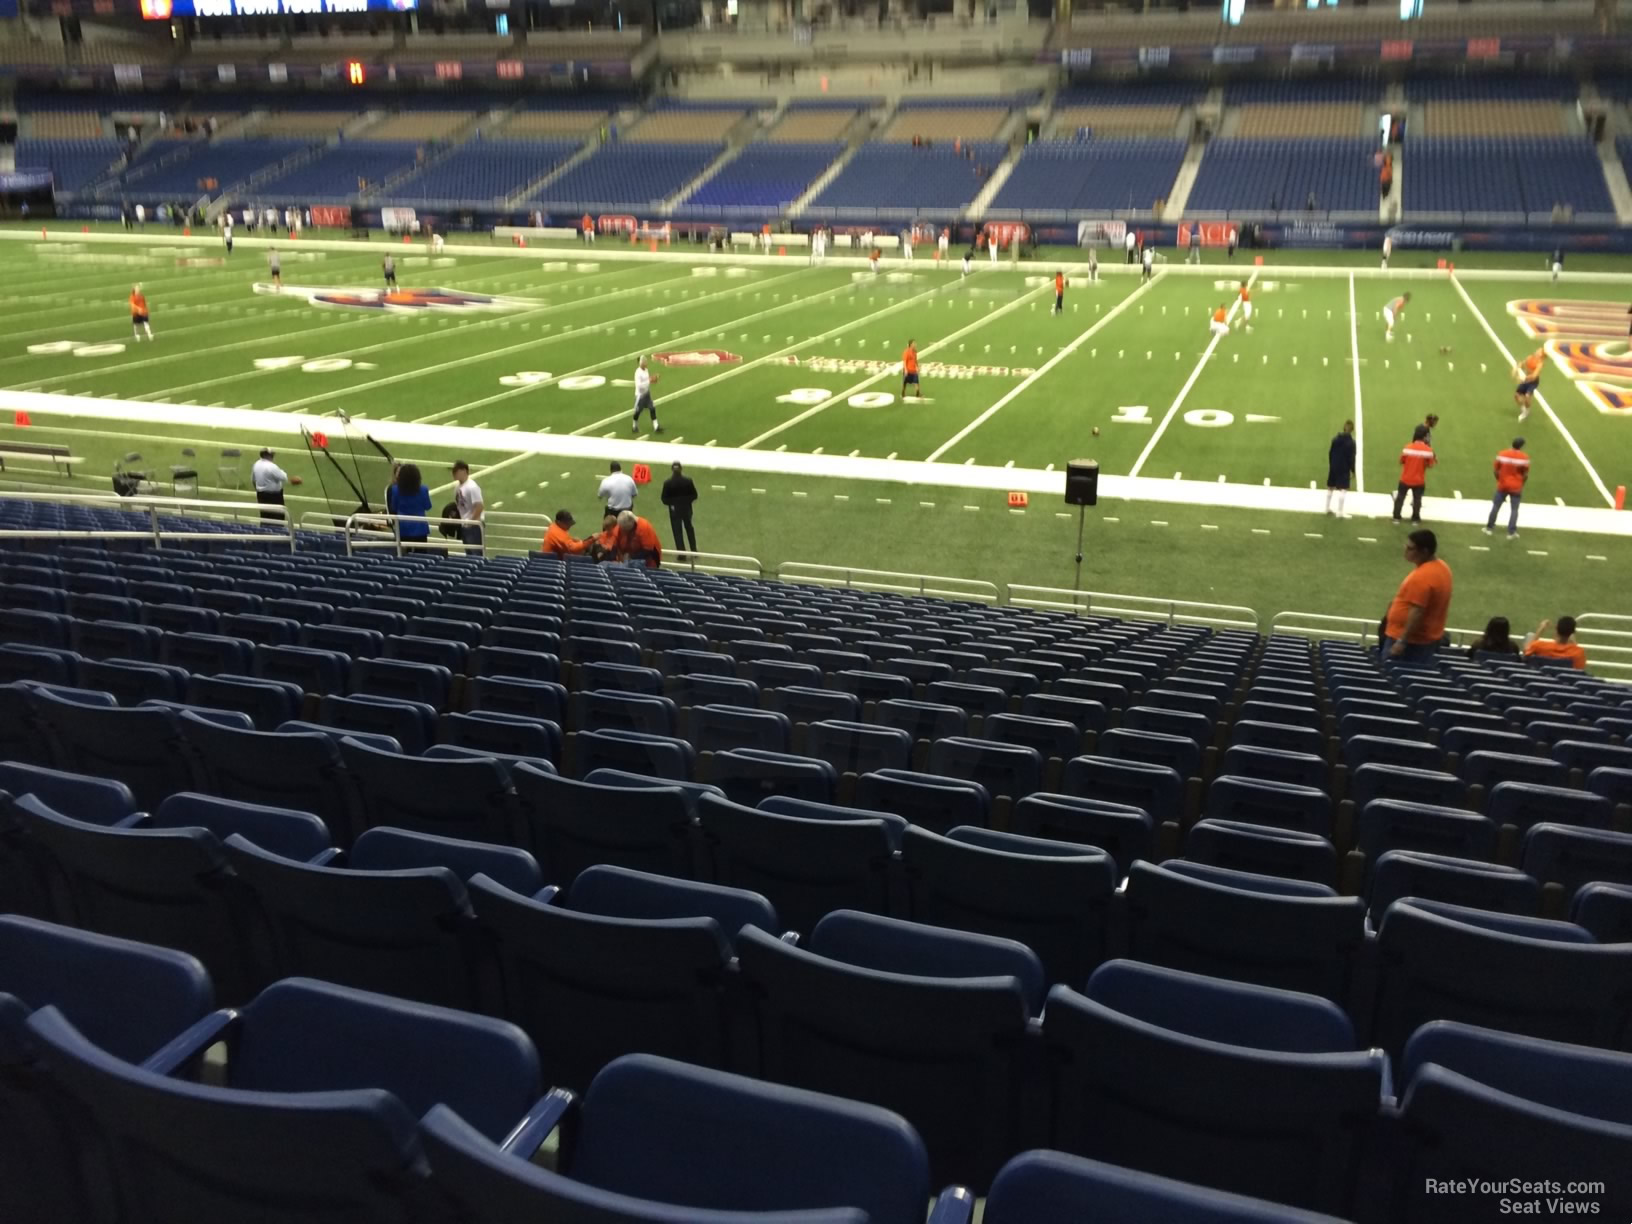 section 131, row 18 seat view  for football - alamodome